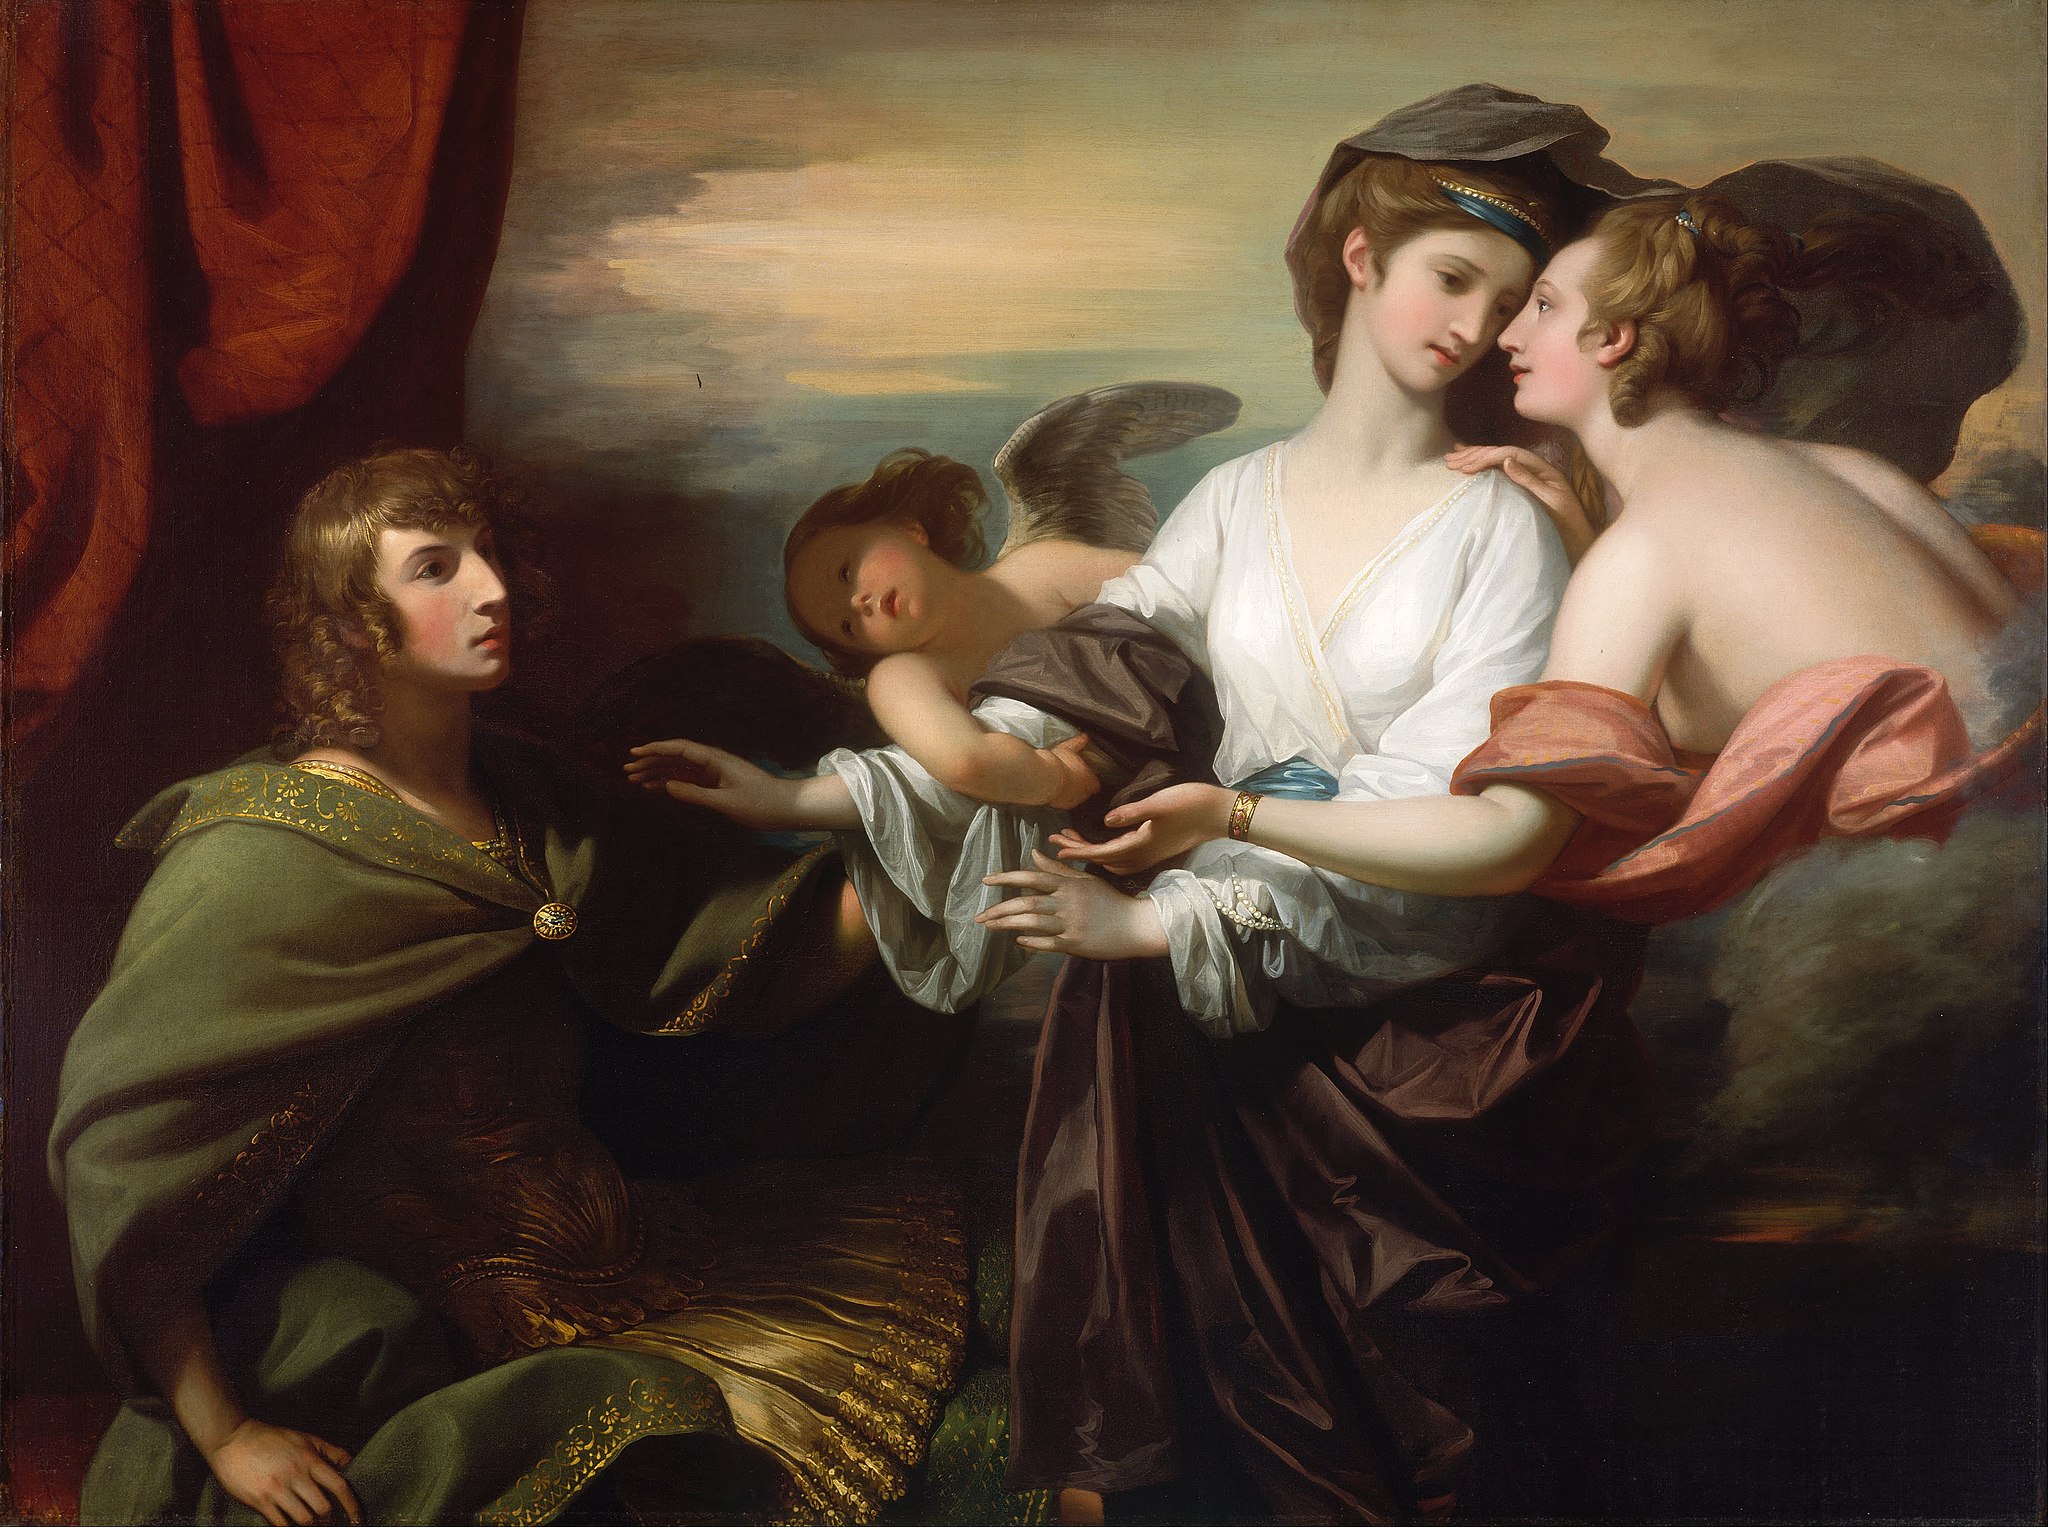 A painting depicting a conversational scene. There are two women (located on the right having a close exchange of words) with a small cherub looming in the background, holding a woman's arm. There is a man seated to the left, trying to engage in the conversation. The setting is in a theatre.